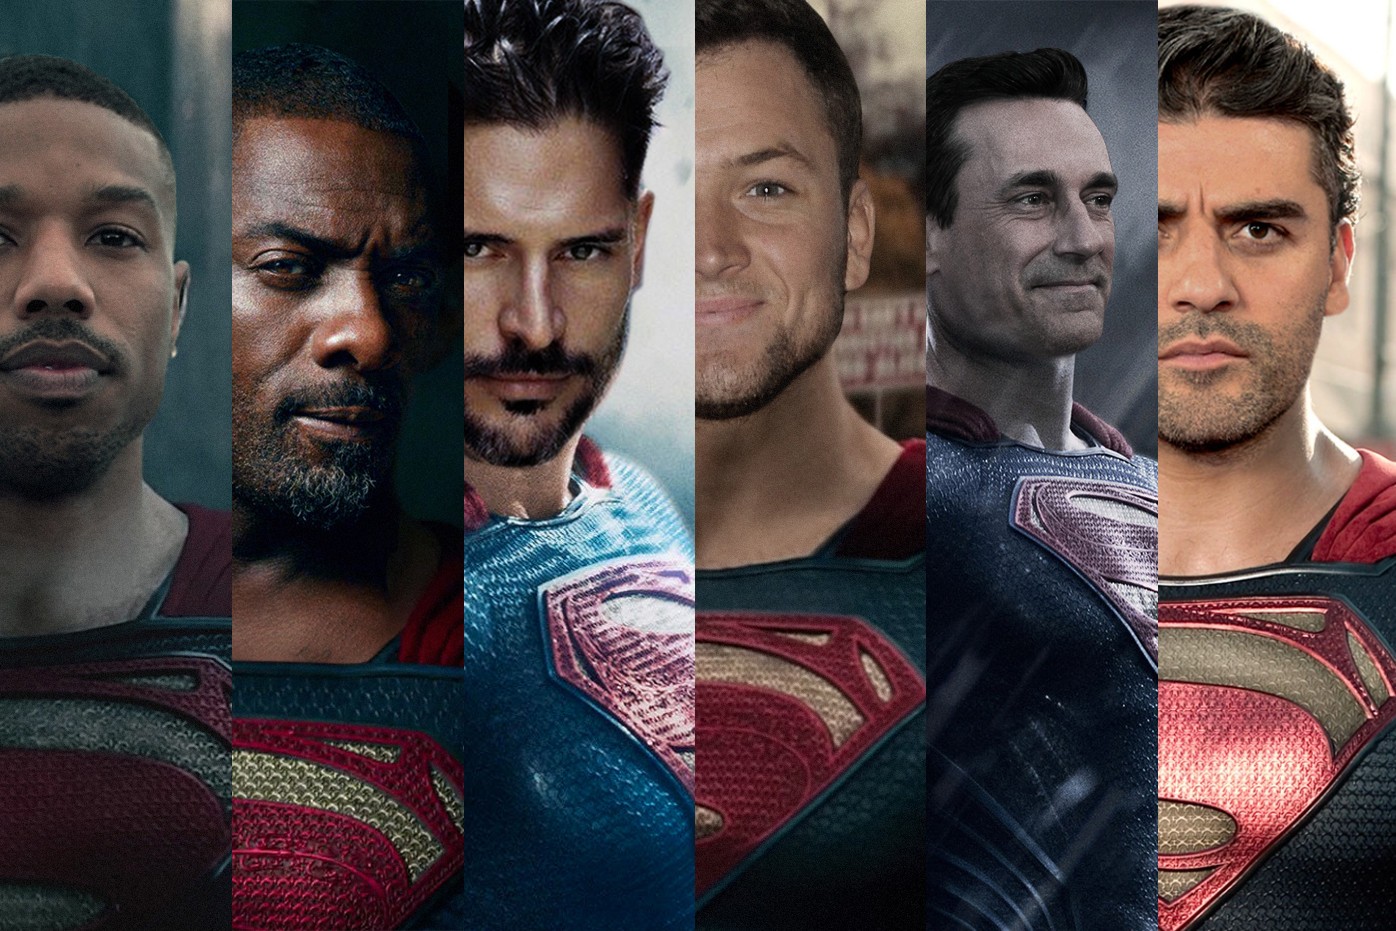 Could one of these six actors – (from left) Michael B. Jordan, Idris Elba, Joe Manganiello, Taron Egerton, Jon Hamm and Oscar Isaac – don Superman’s red cape if rumours turn out to be true that actor Henry Cavill’s days in the role are at an end. Photos: Warner Bros./Hypebeast